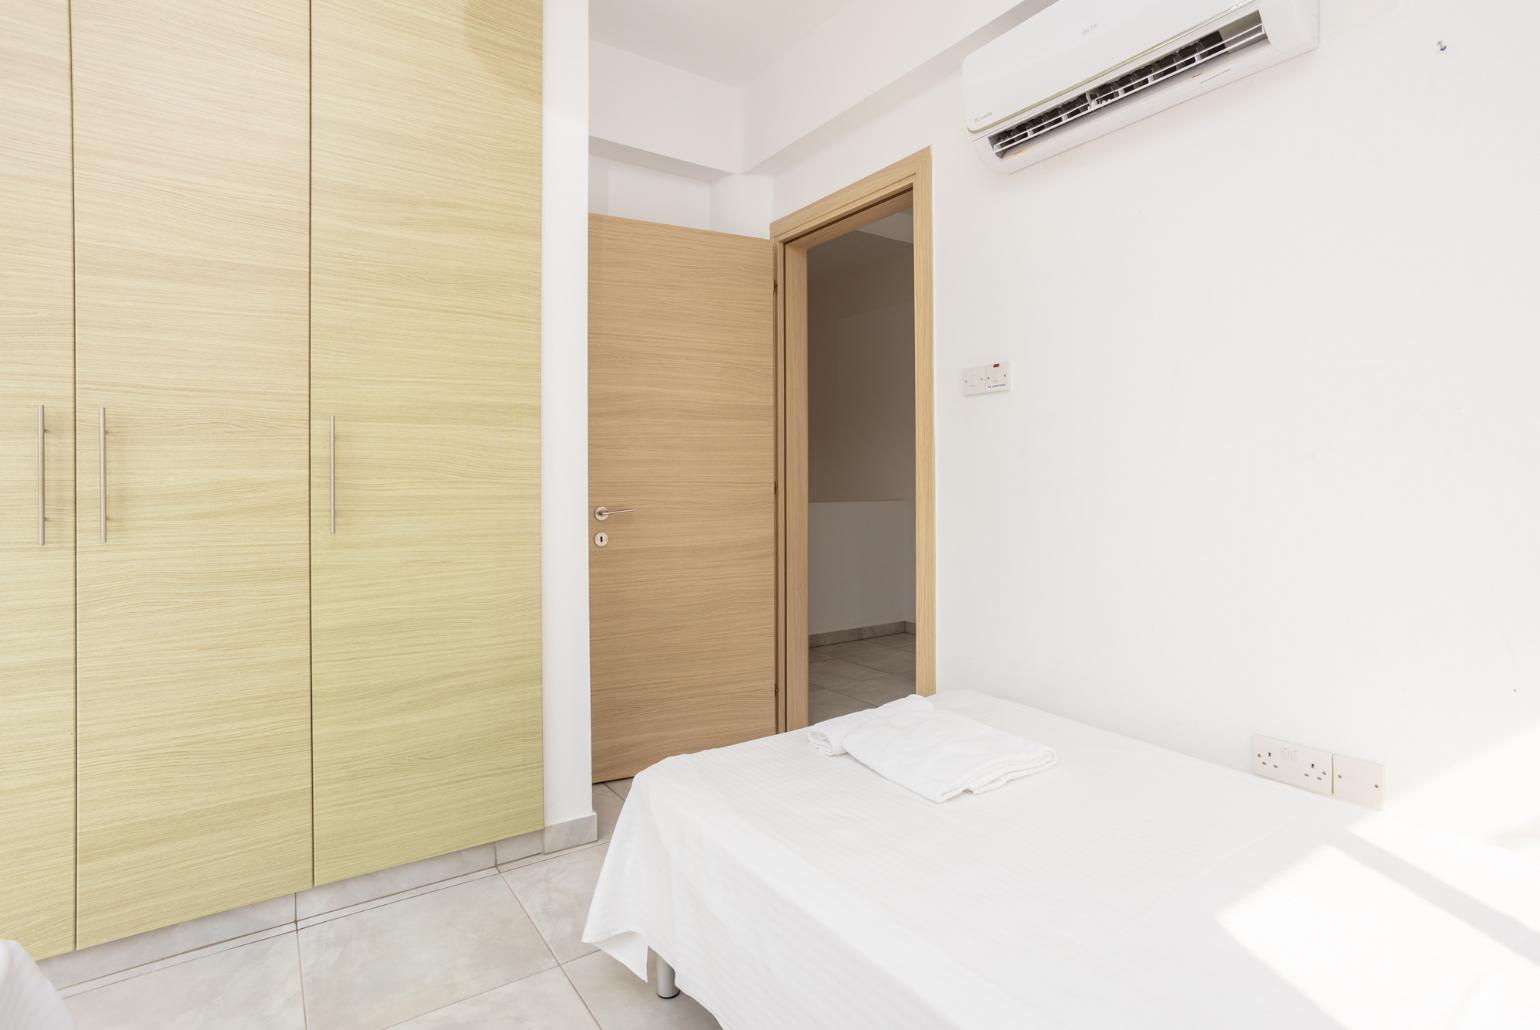 Twin bedroom with A/C